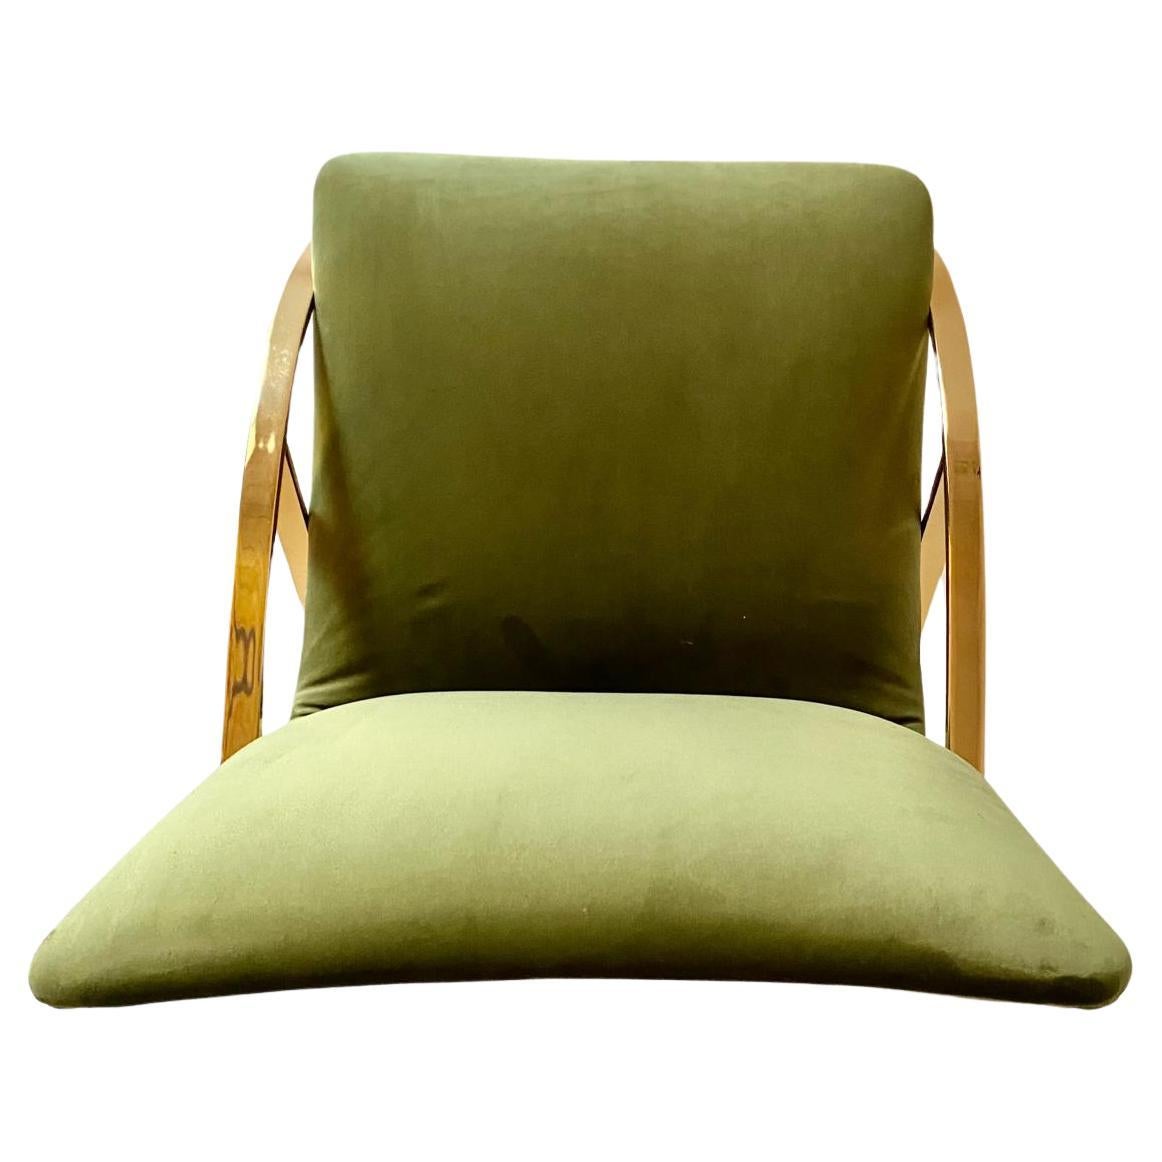 Vintage Desk Chair with Green Velvet Cover and Gold frame, Italy 1970s For Sale 1